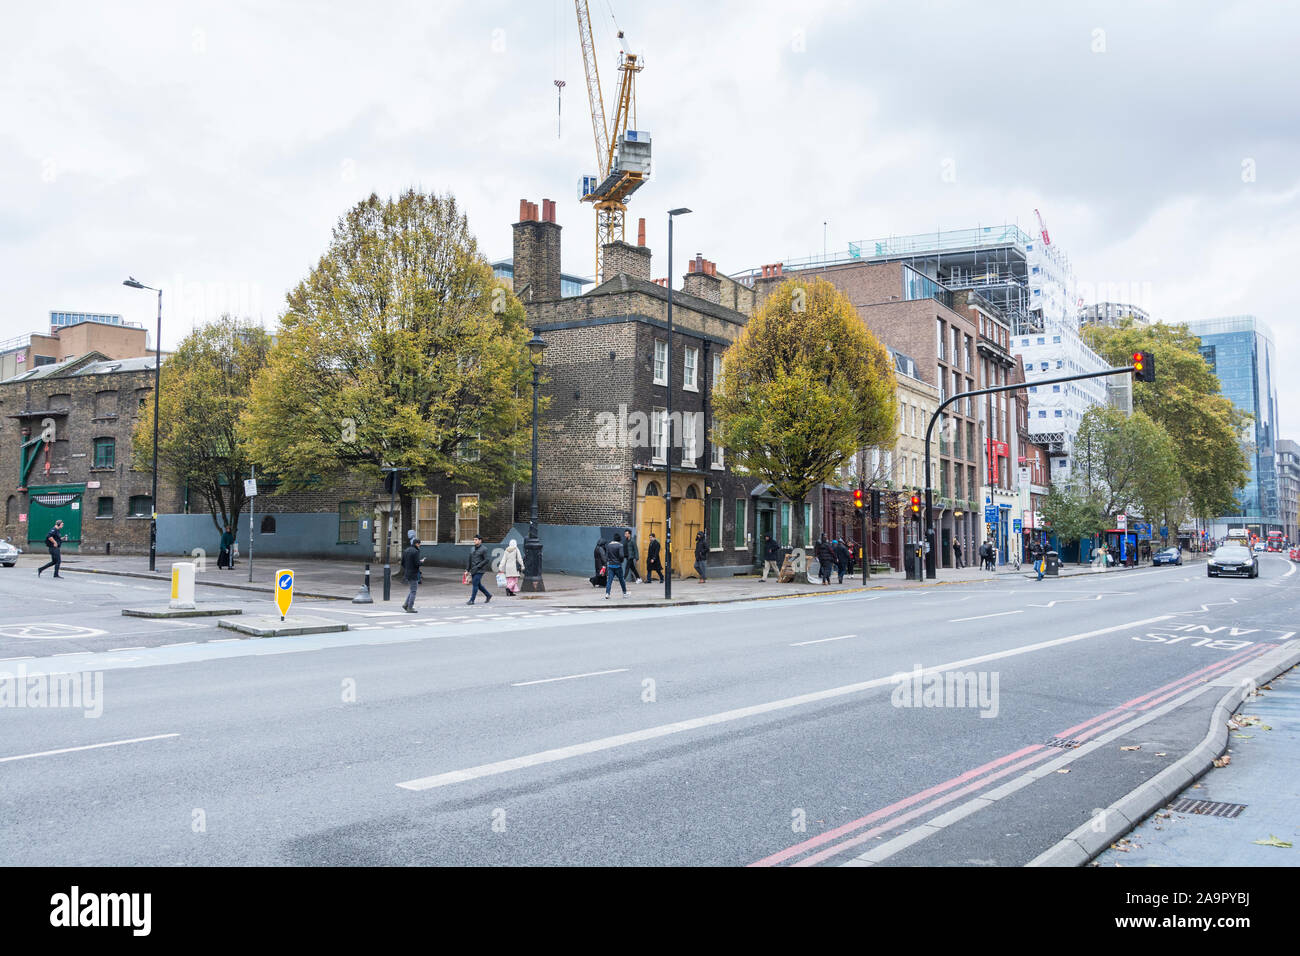 Plans approved for building a boutique hotel on the site of the world-famous Whitechapel Bell Foundry in Whitechapel, London, UK Stock Photo